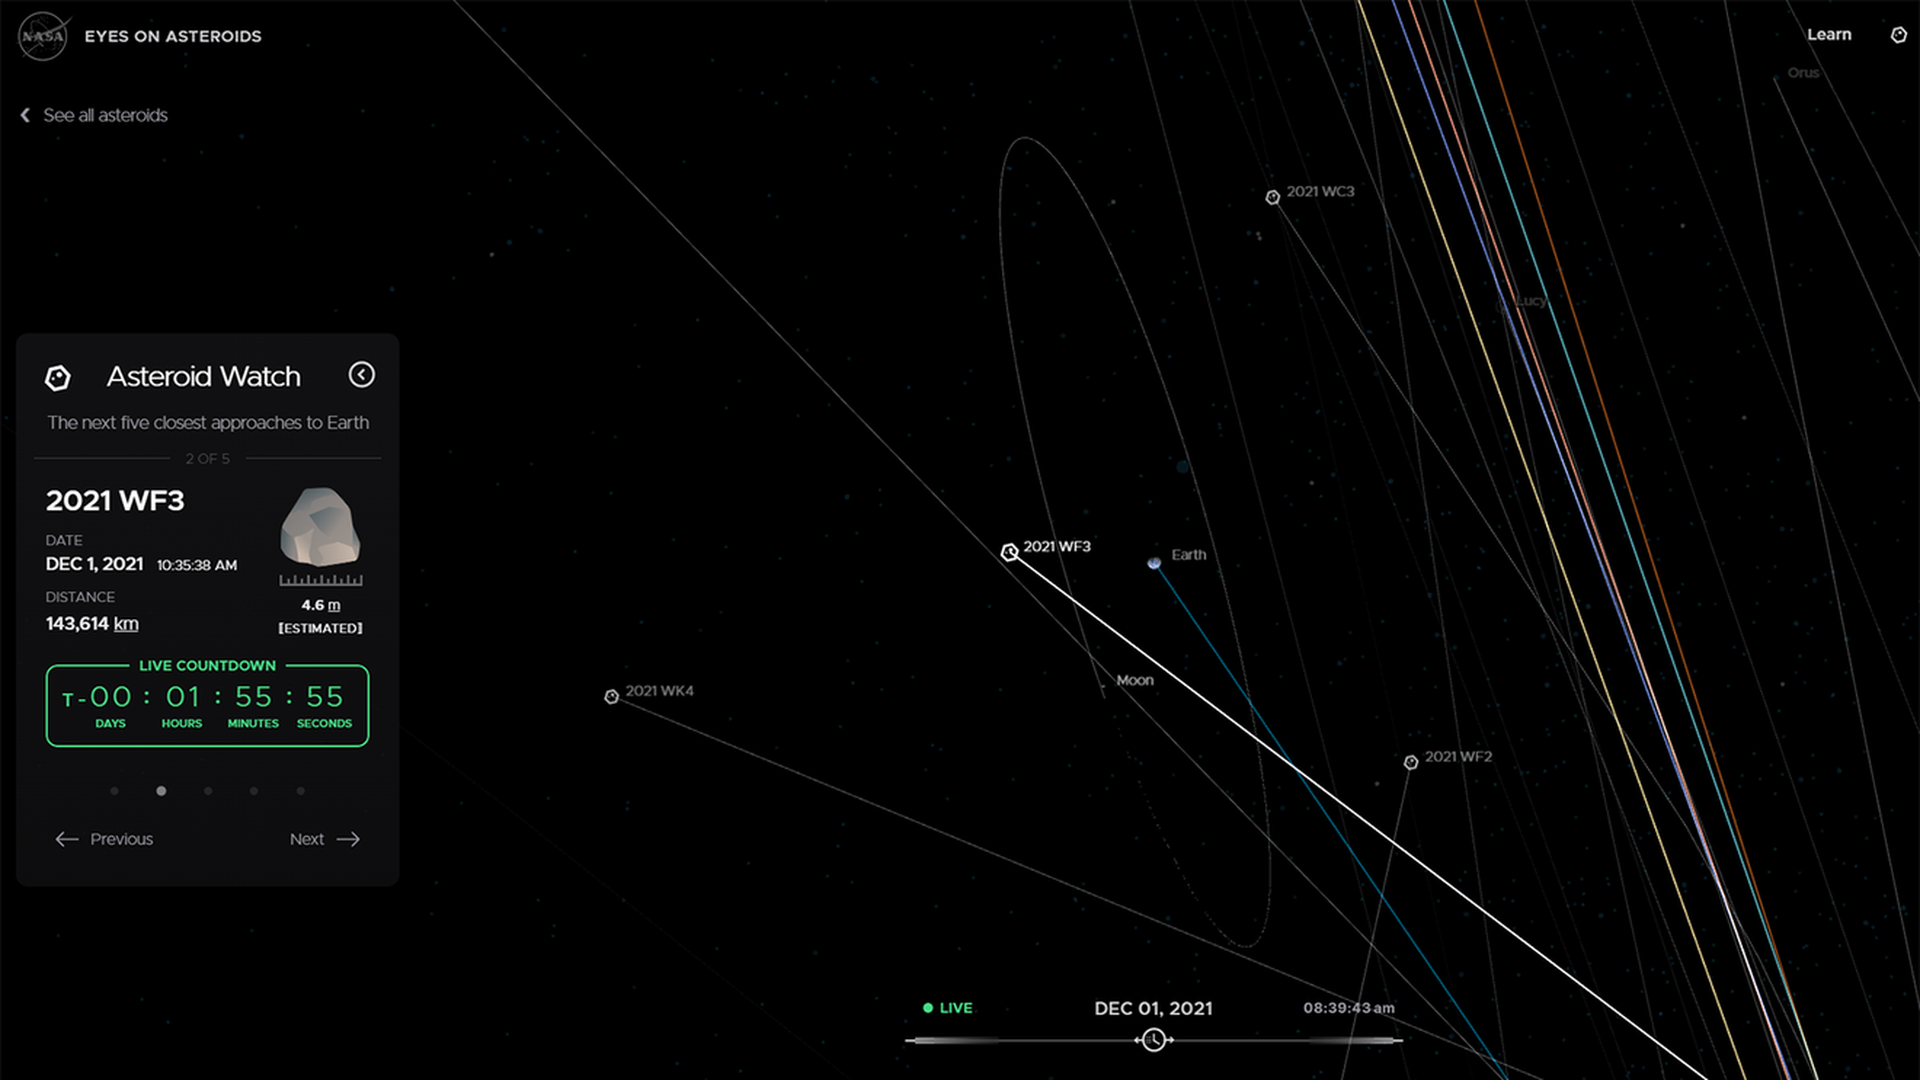 Screenshot of asteroids tracked by NASA as visualized in a graphic